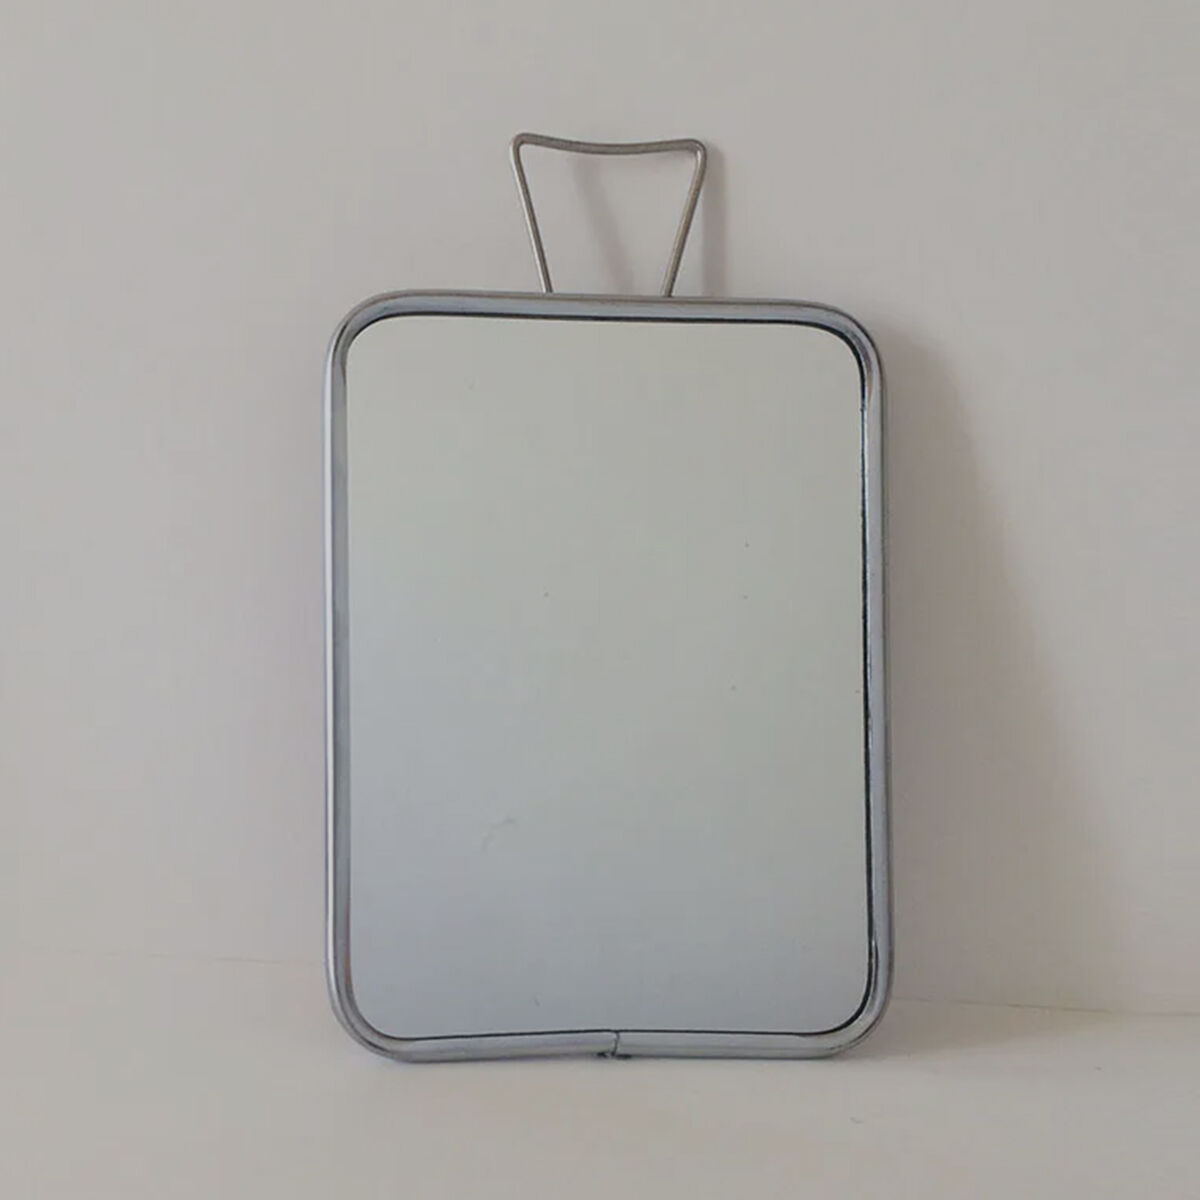 SEE OUR BARBER MIRRORS FOR LESS THAN 100 EUROS